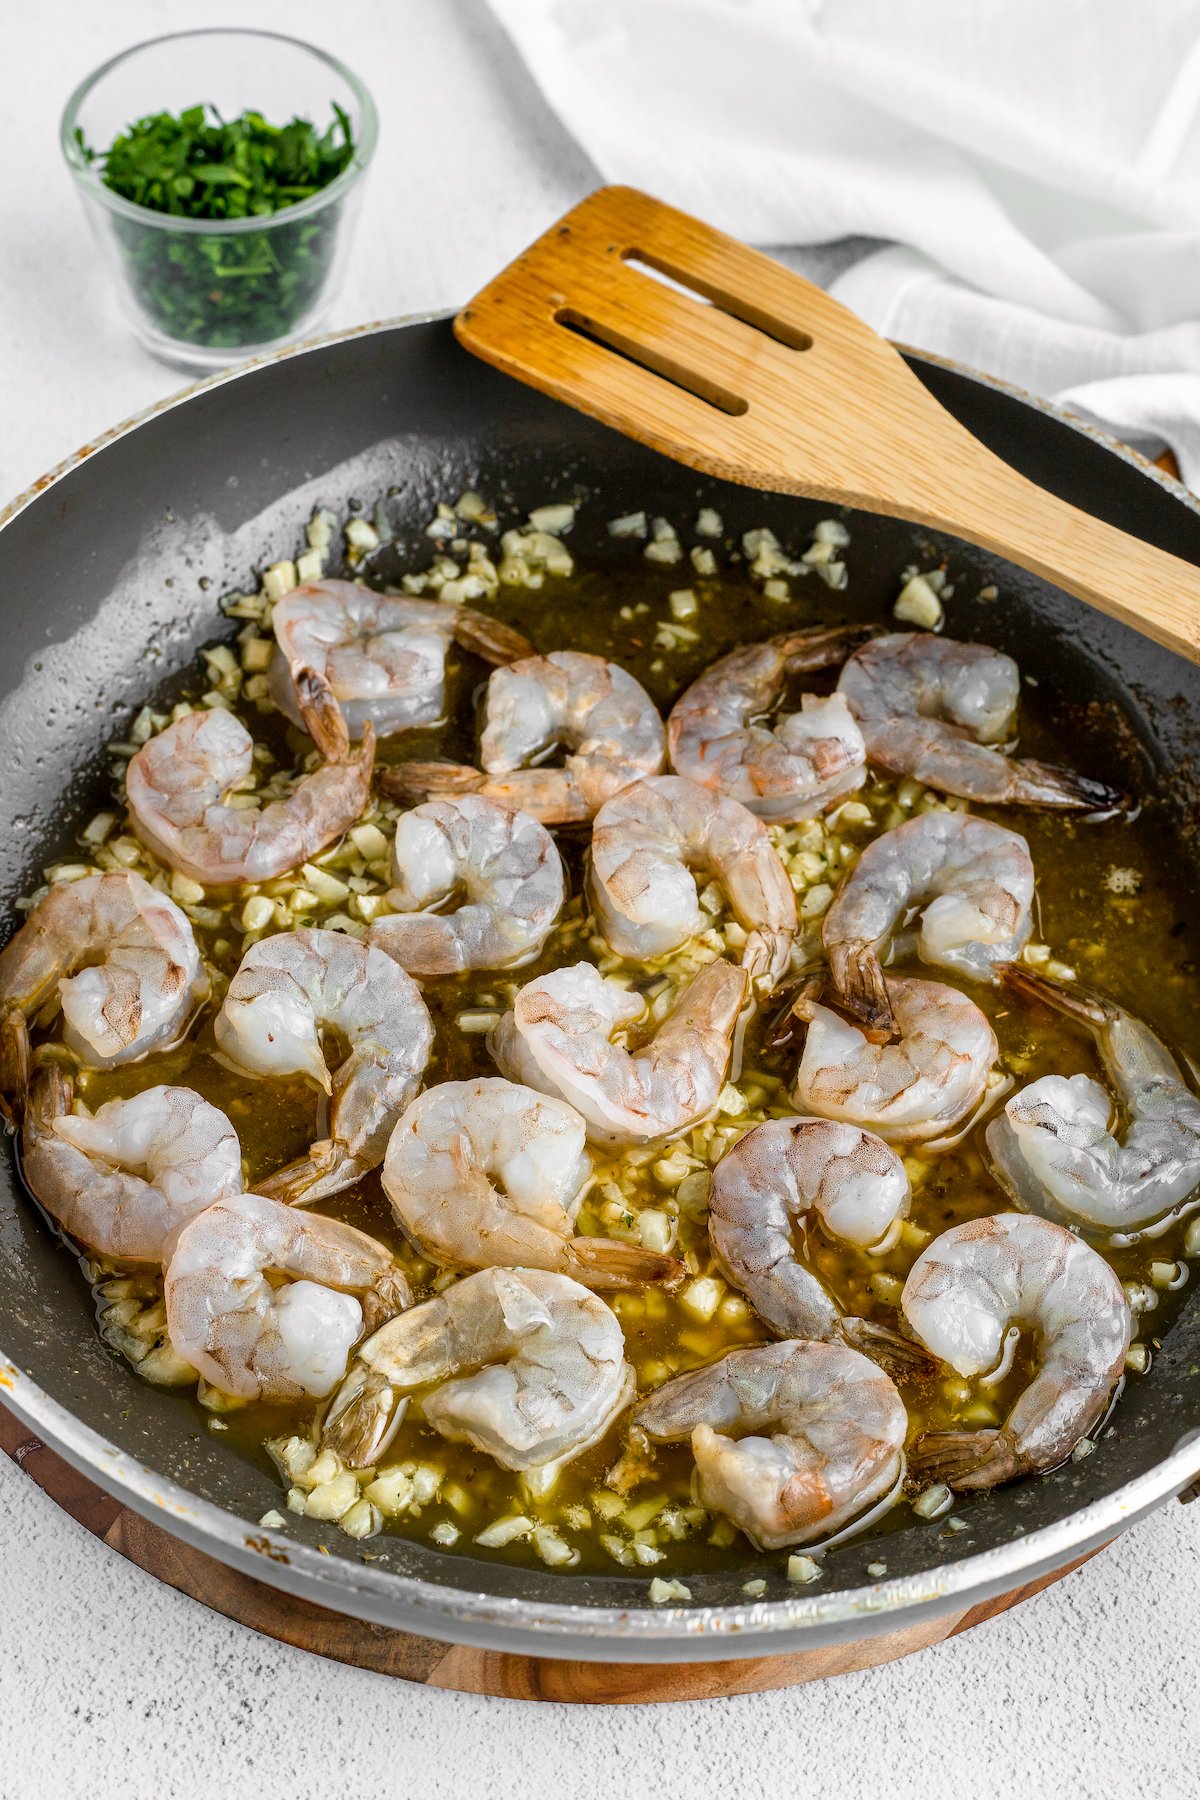 Shrimp sauteing in a skillet with garlic.